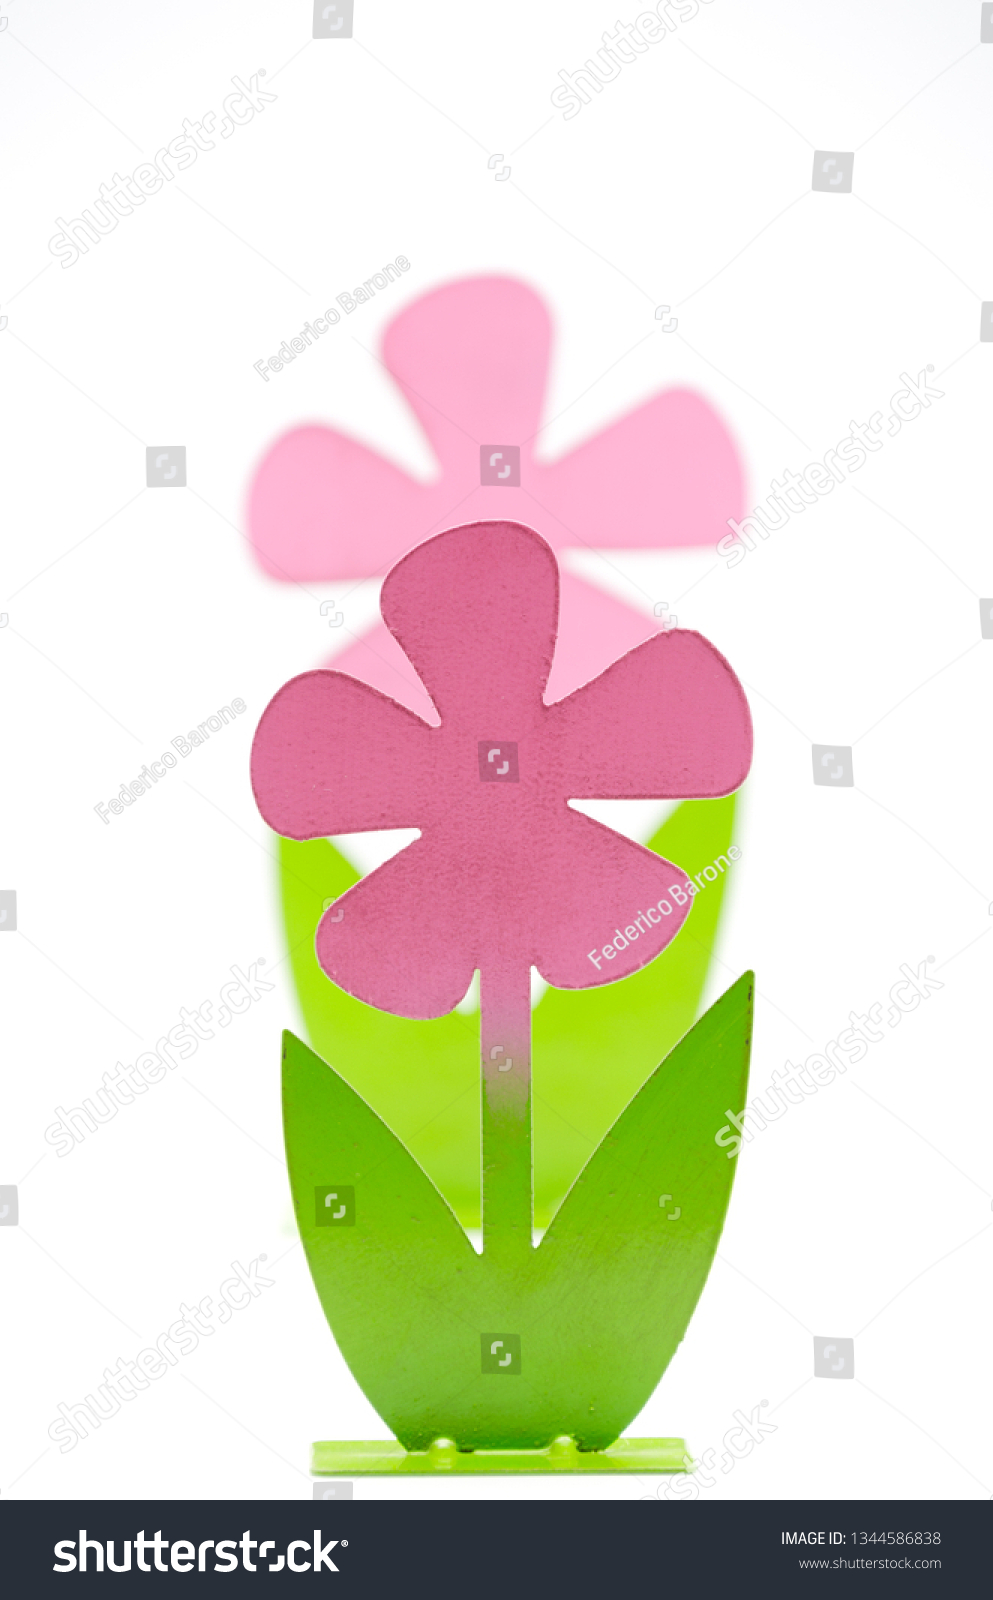 stock-photo-abstract-flower-on-white-bac